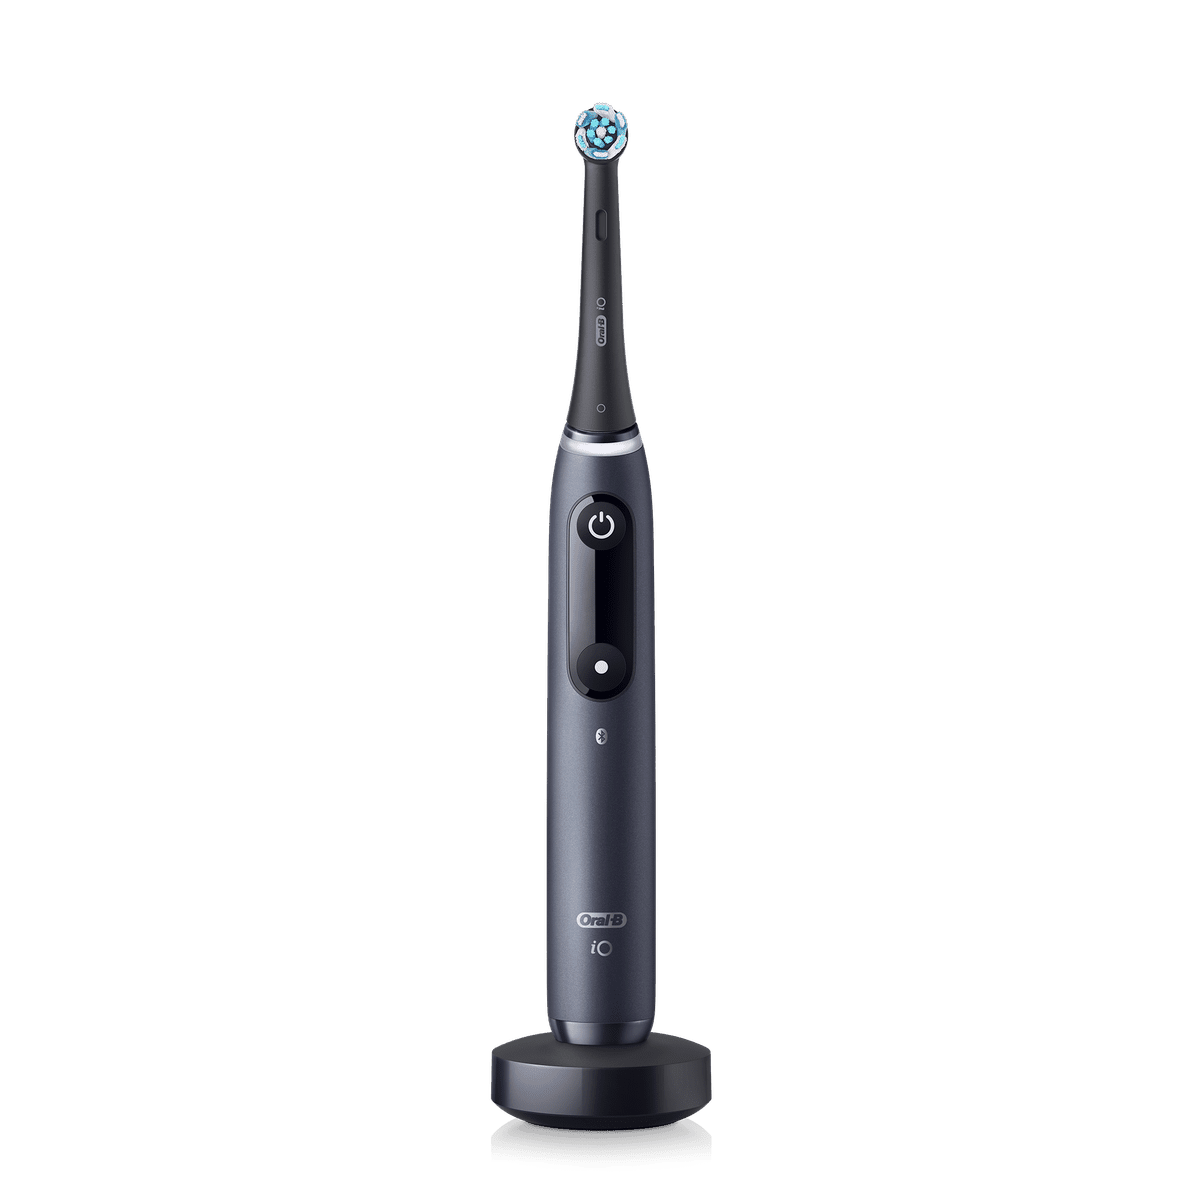 oral care beauty products health beauty awards 2020